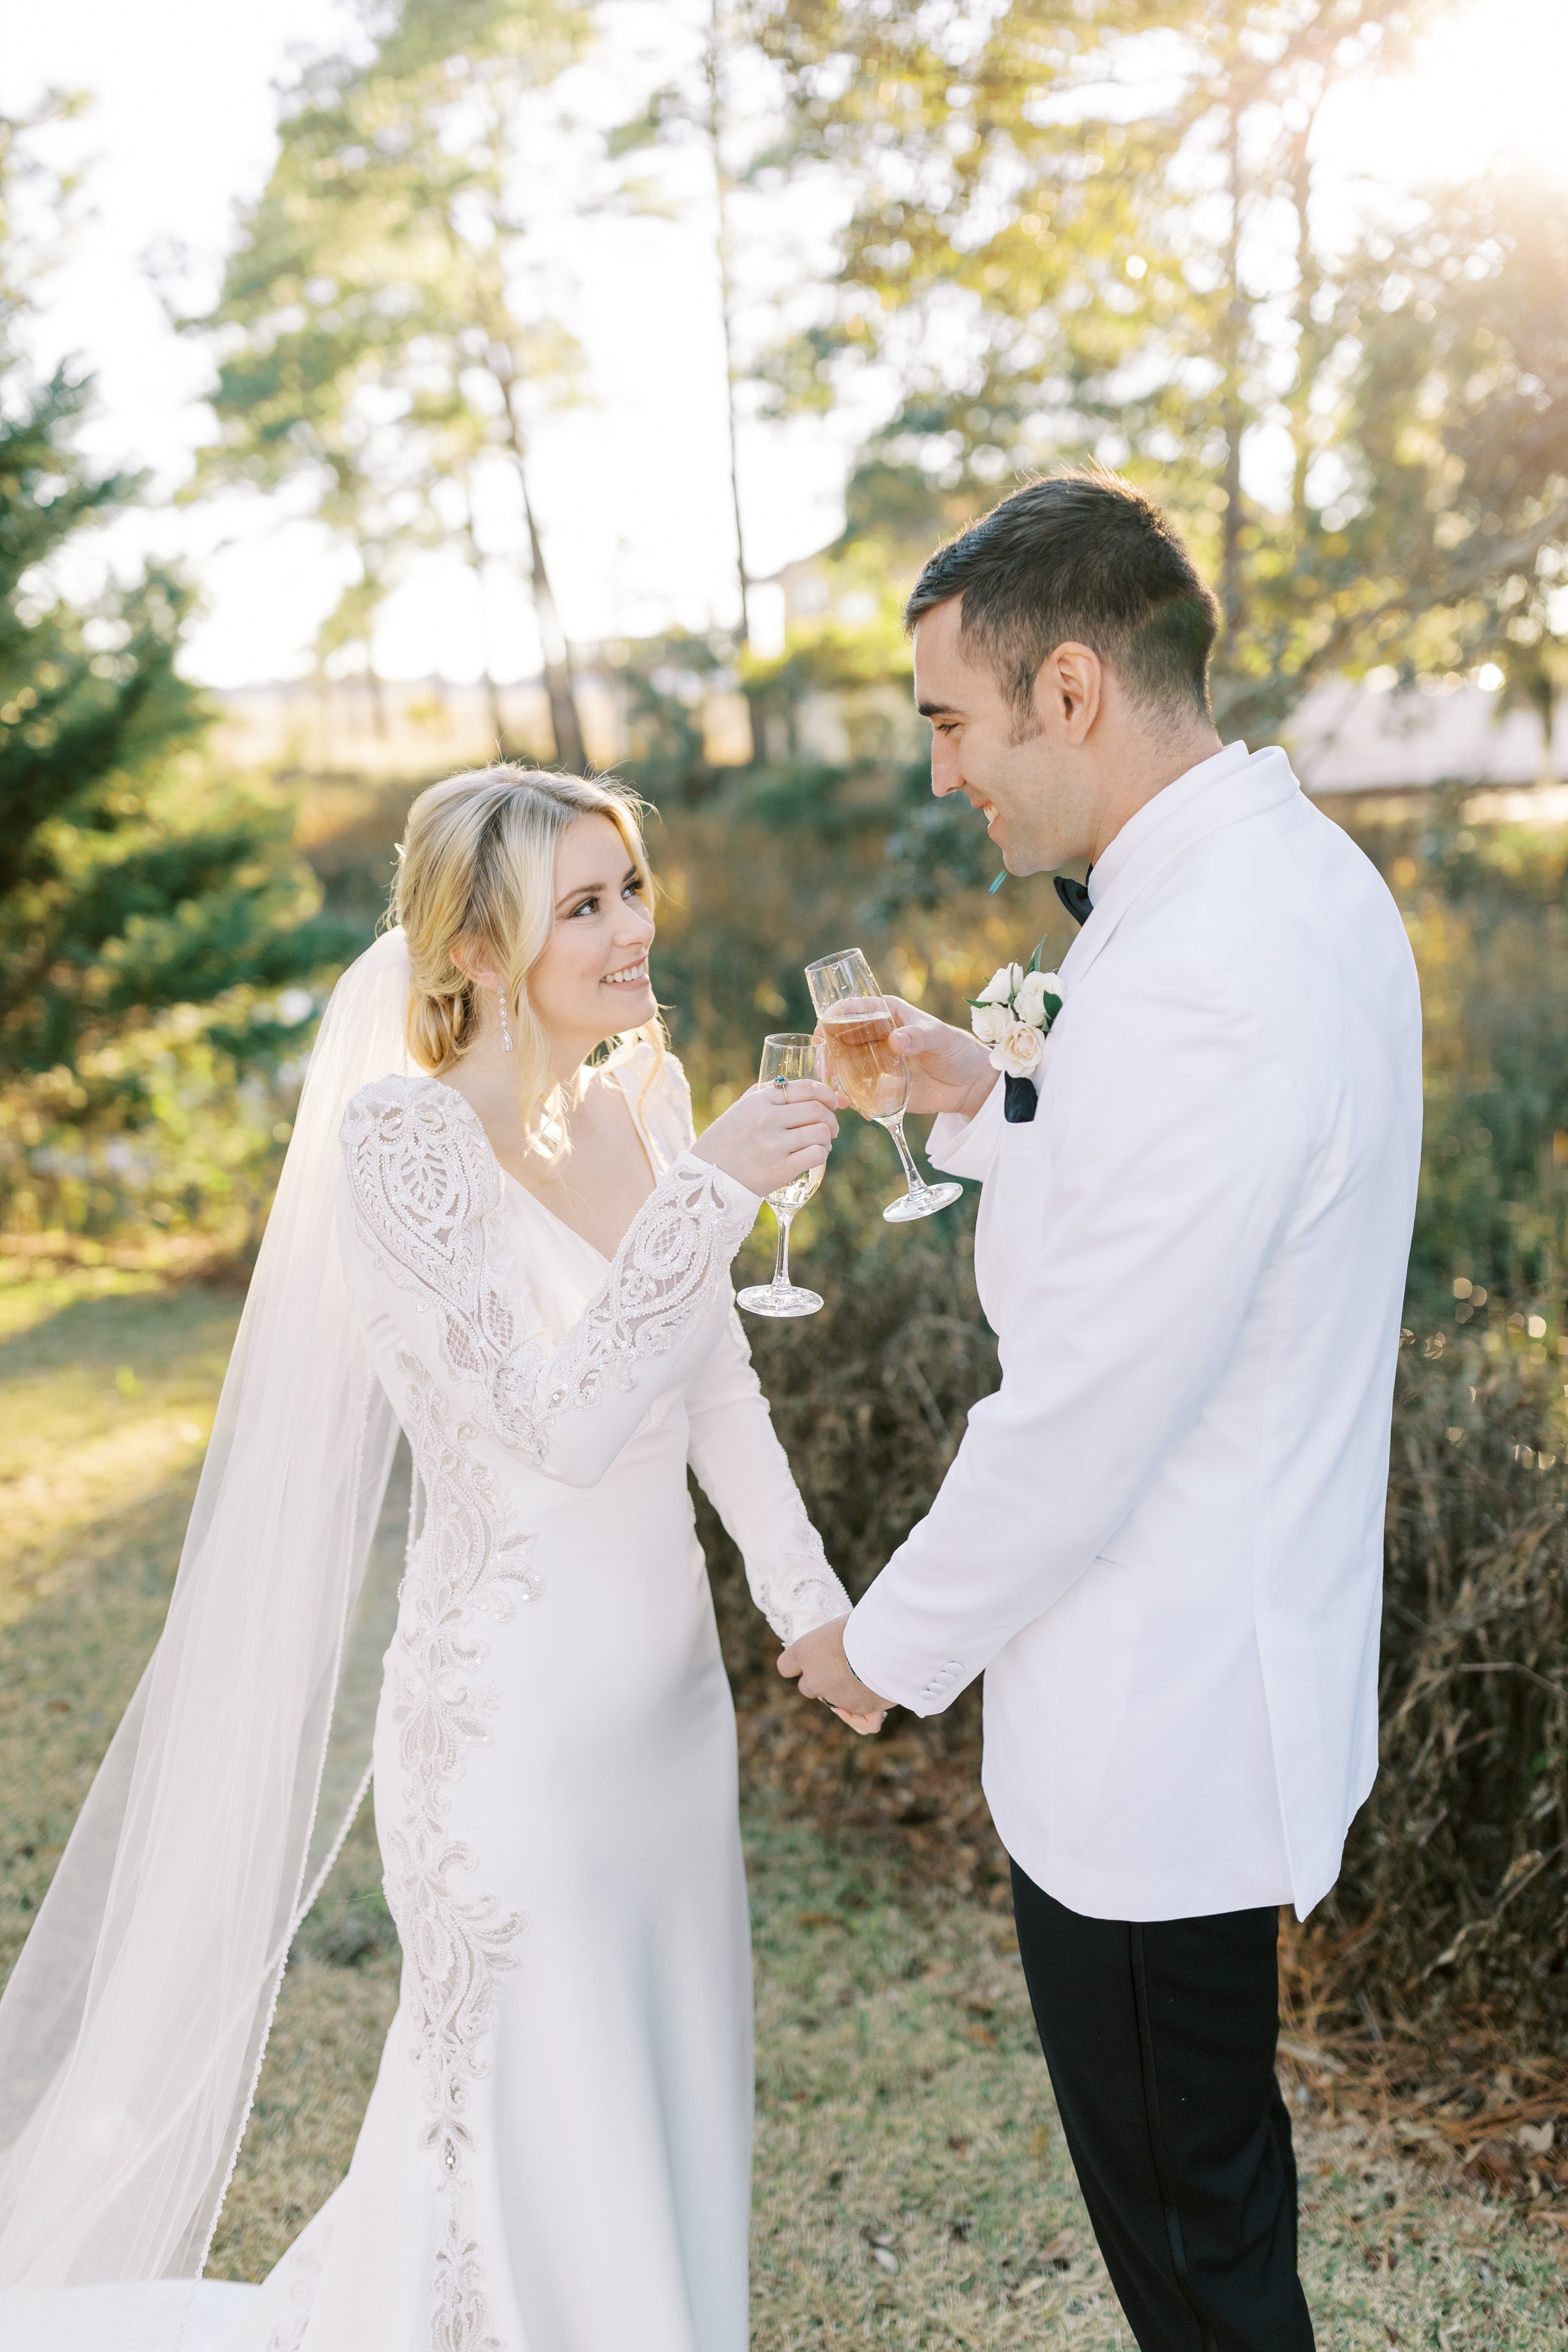 cheyenne-and-nicks-wedding-at-the-tybee-island-wedding-chapel-planned-by-savannah-wedding-planner-ivory-and-beau-with-sottero-and-midgley-gown-from-savannah-bridal-shop-and-wedding-florals-from-savannah-florist-12.jpg